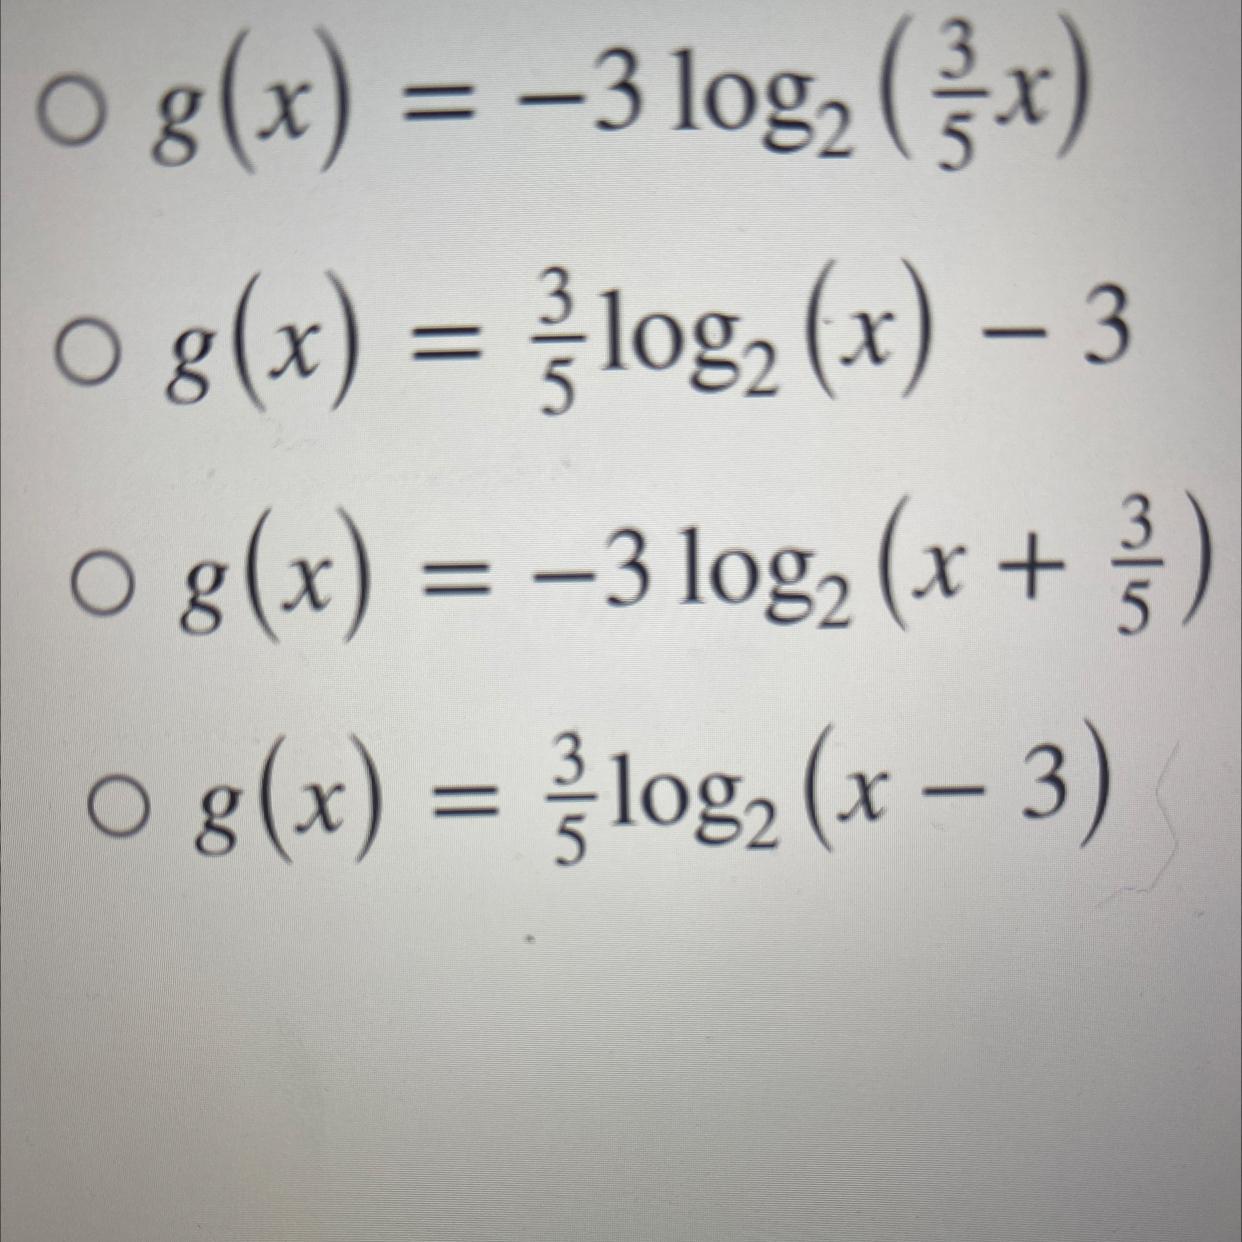 The Function F(x) = Log2 X Is Transformed 3 Units To The Right And Vertically Compressed By A Factor